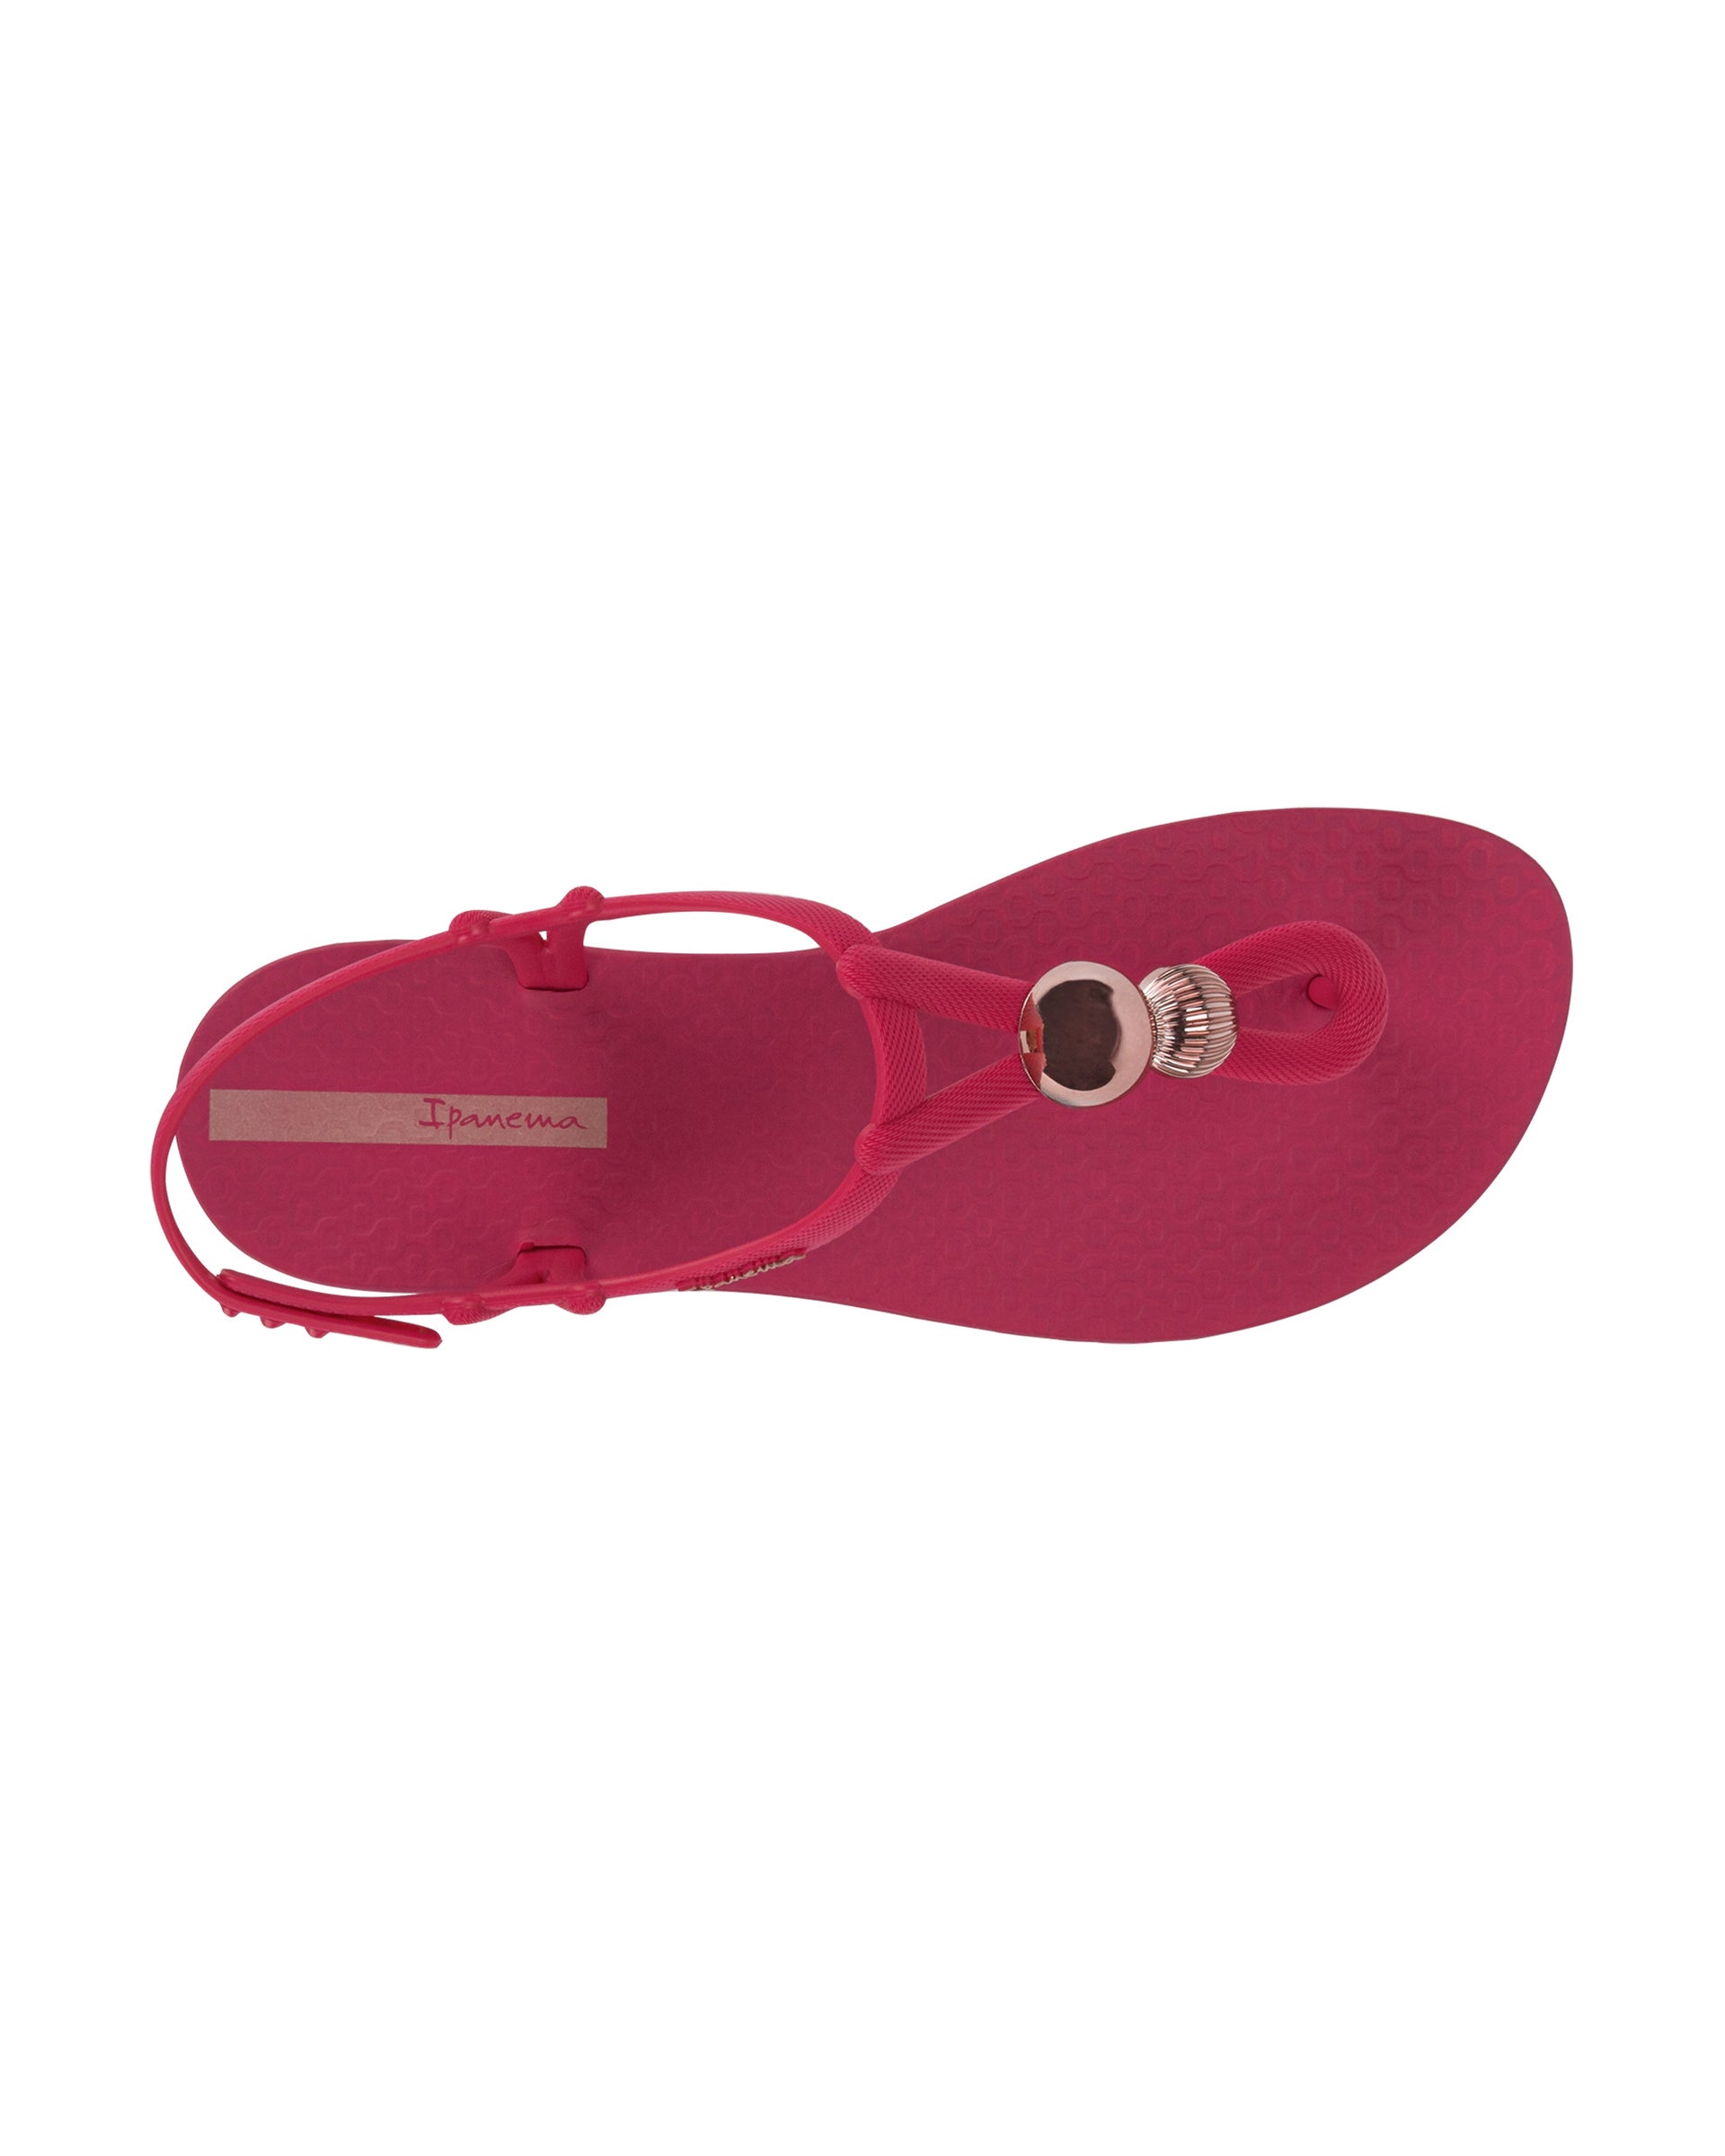 Top view of a pink Ipanema Class Spheres women's t-strap sandal with metallic bauble.